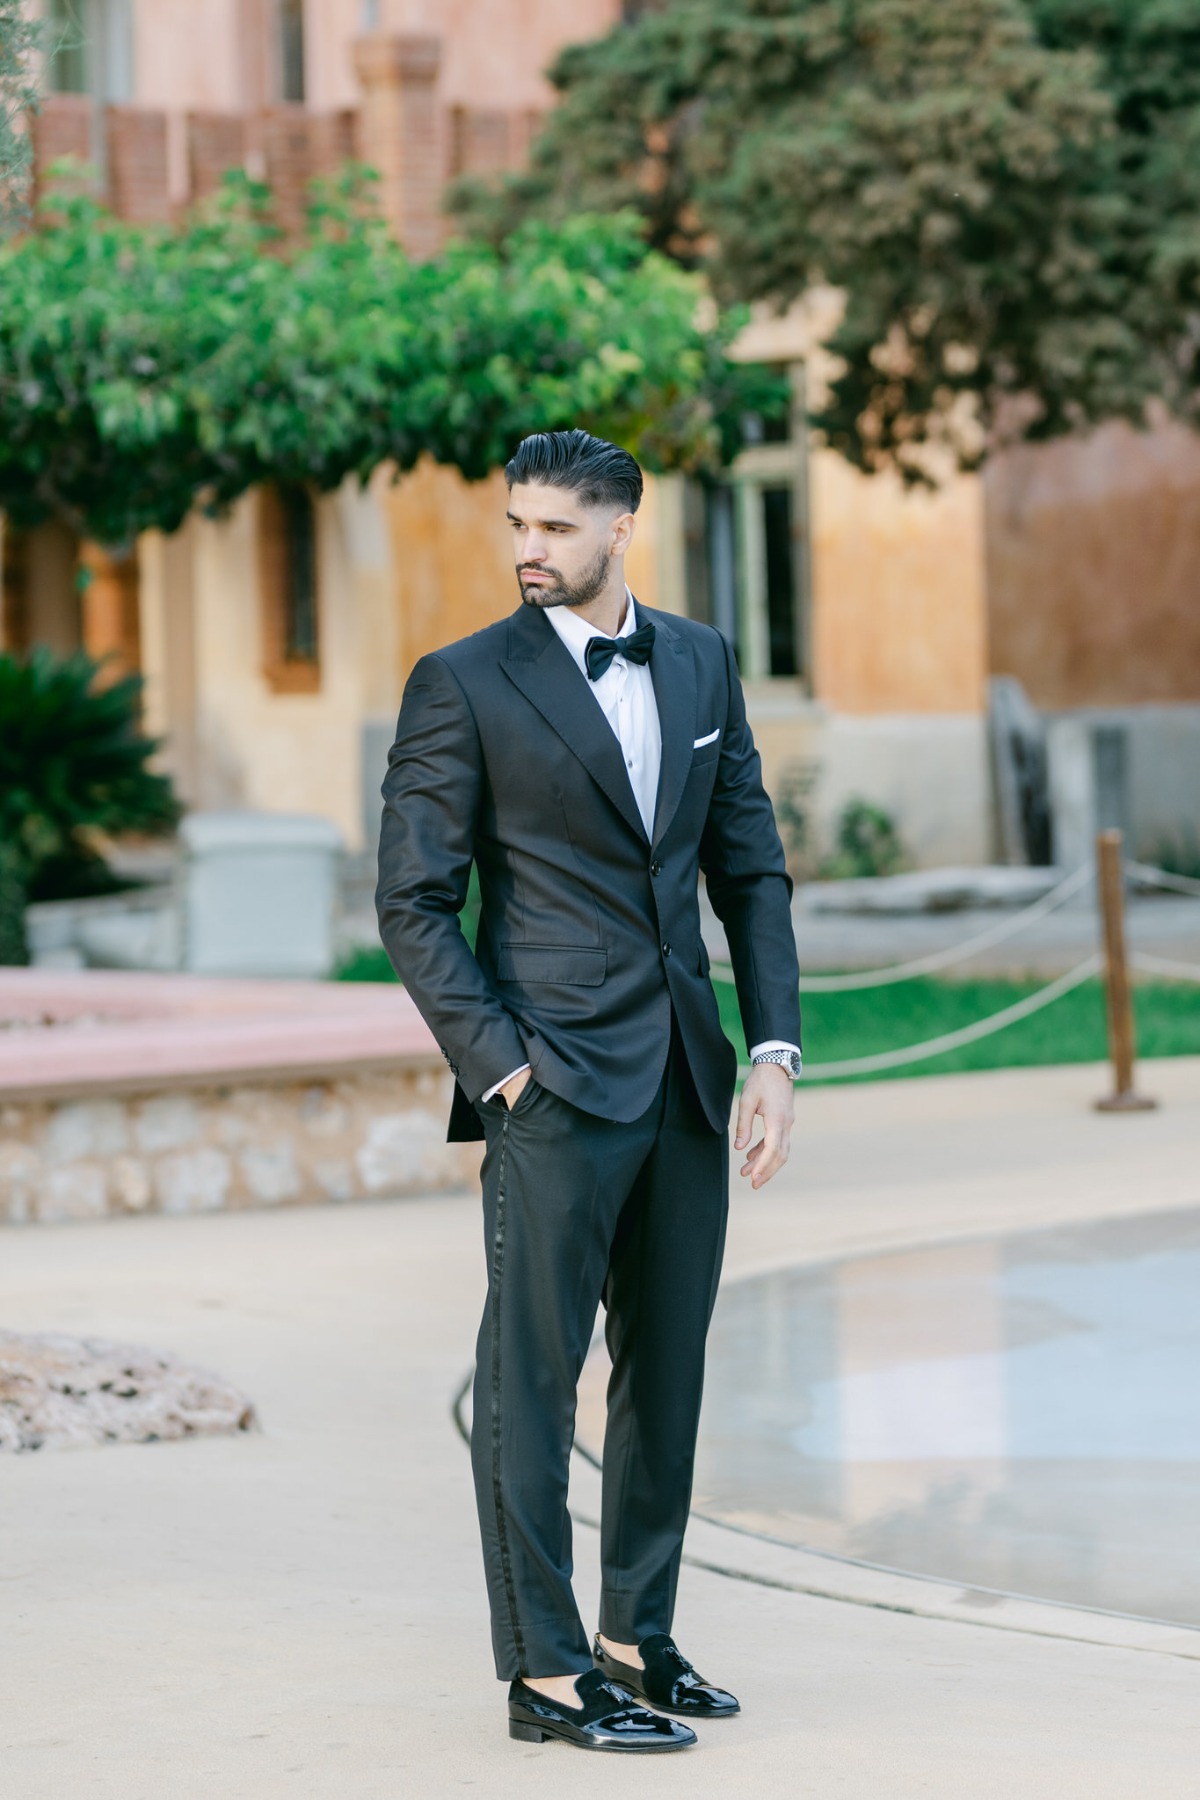 Timeless groom in classic black tuxedo with shiny loafers